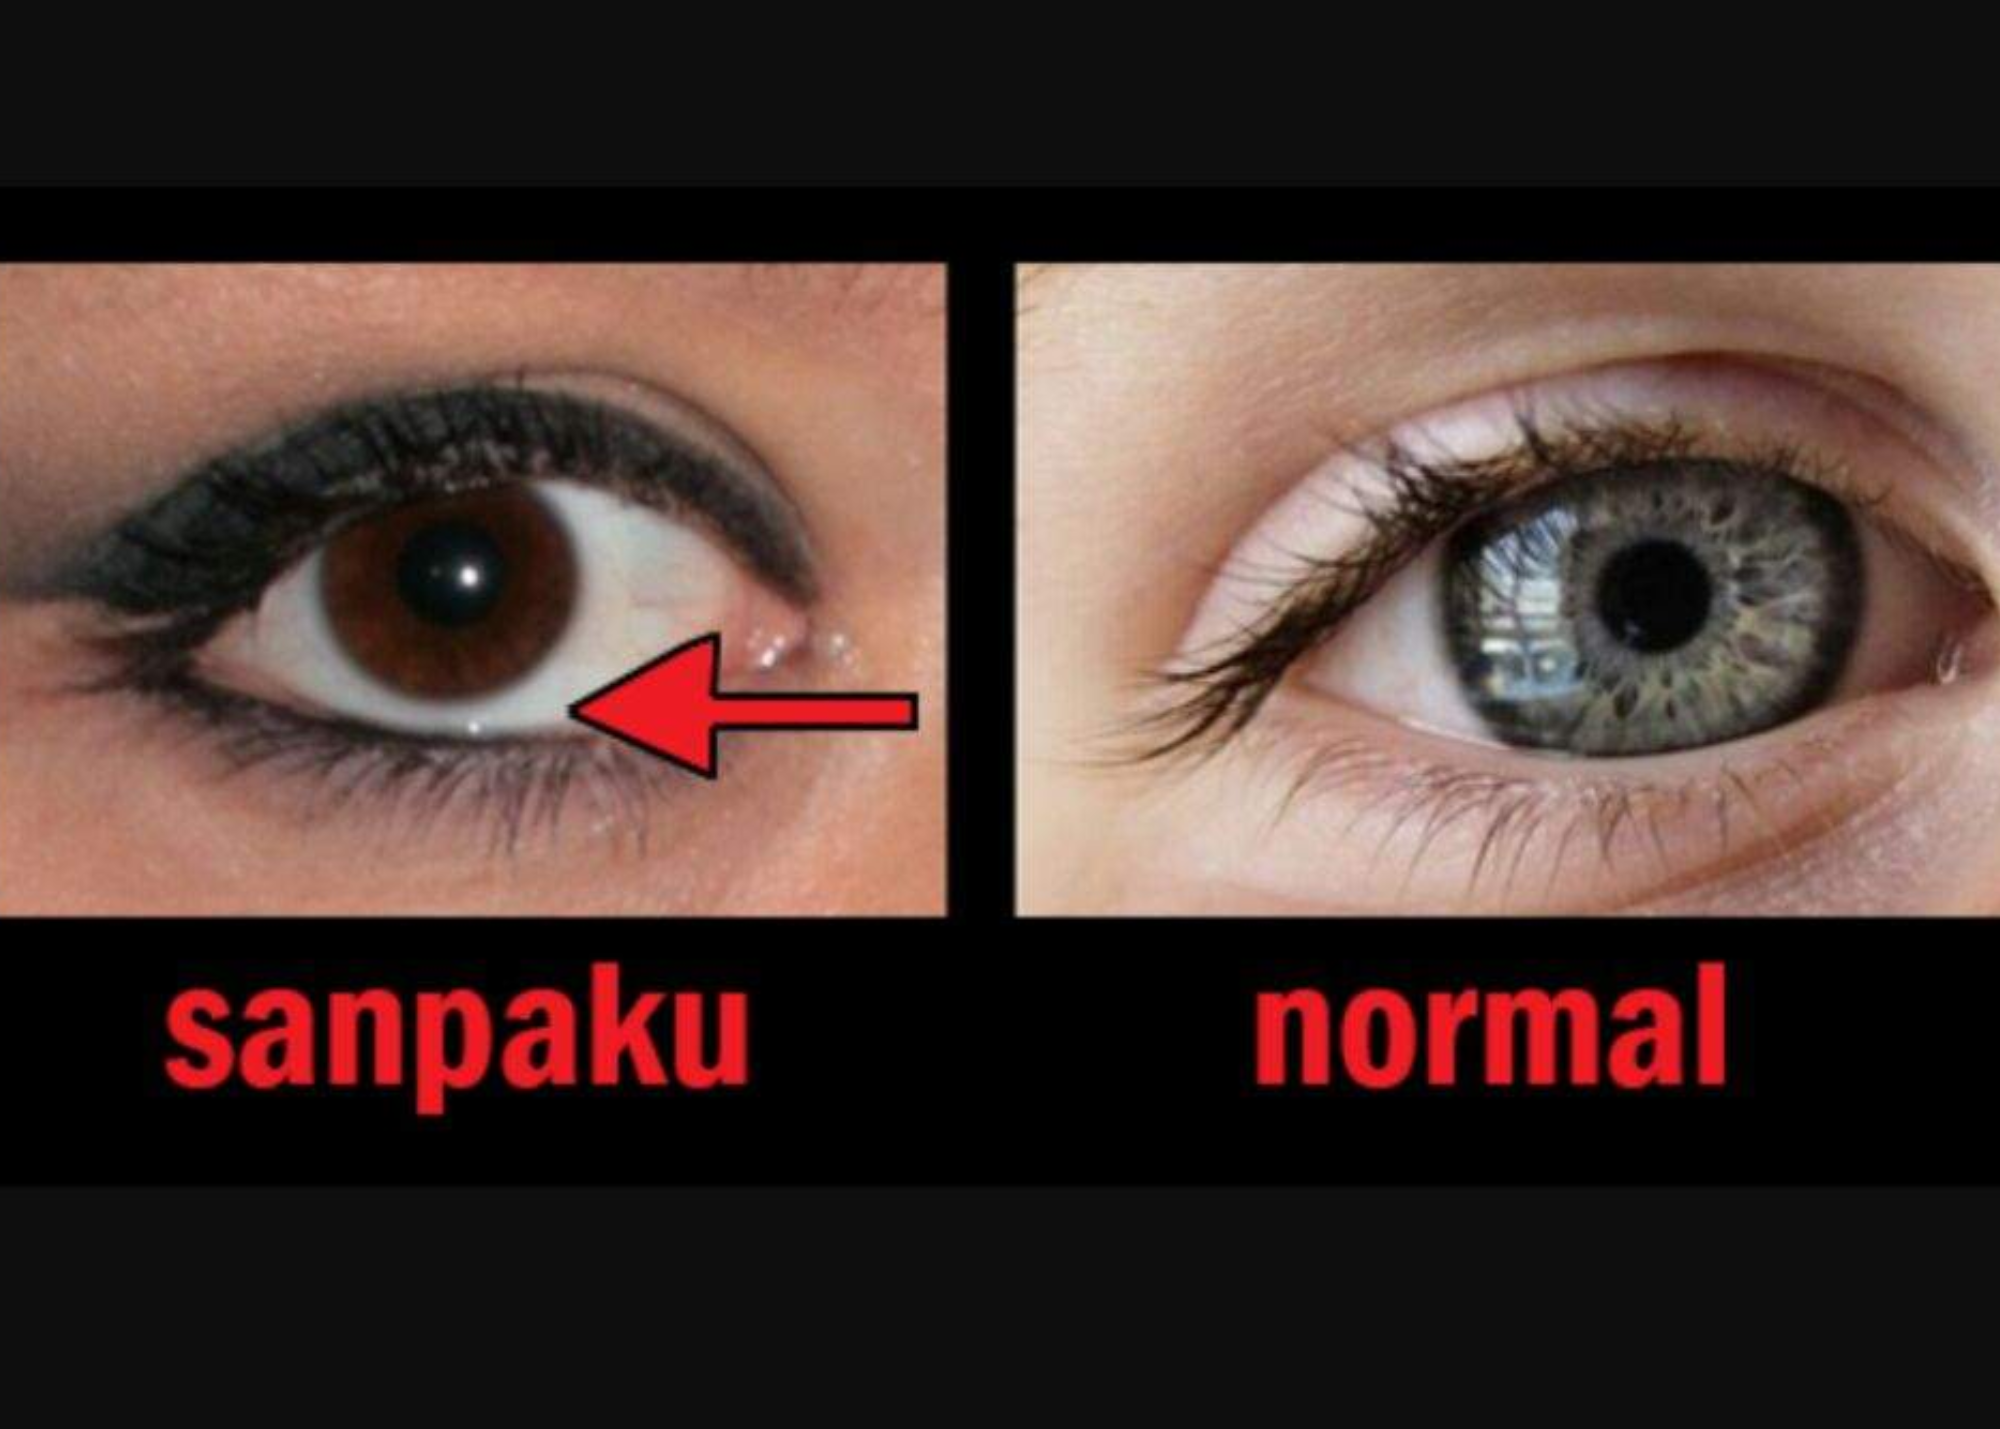 An arrow pointing from right to left depicts a normal eye, while a single eye on the left depicts a sanpaku